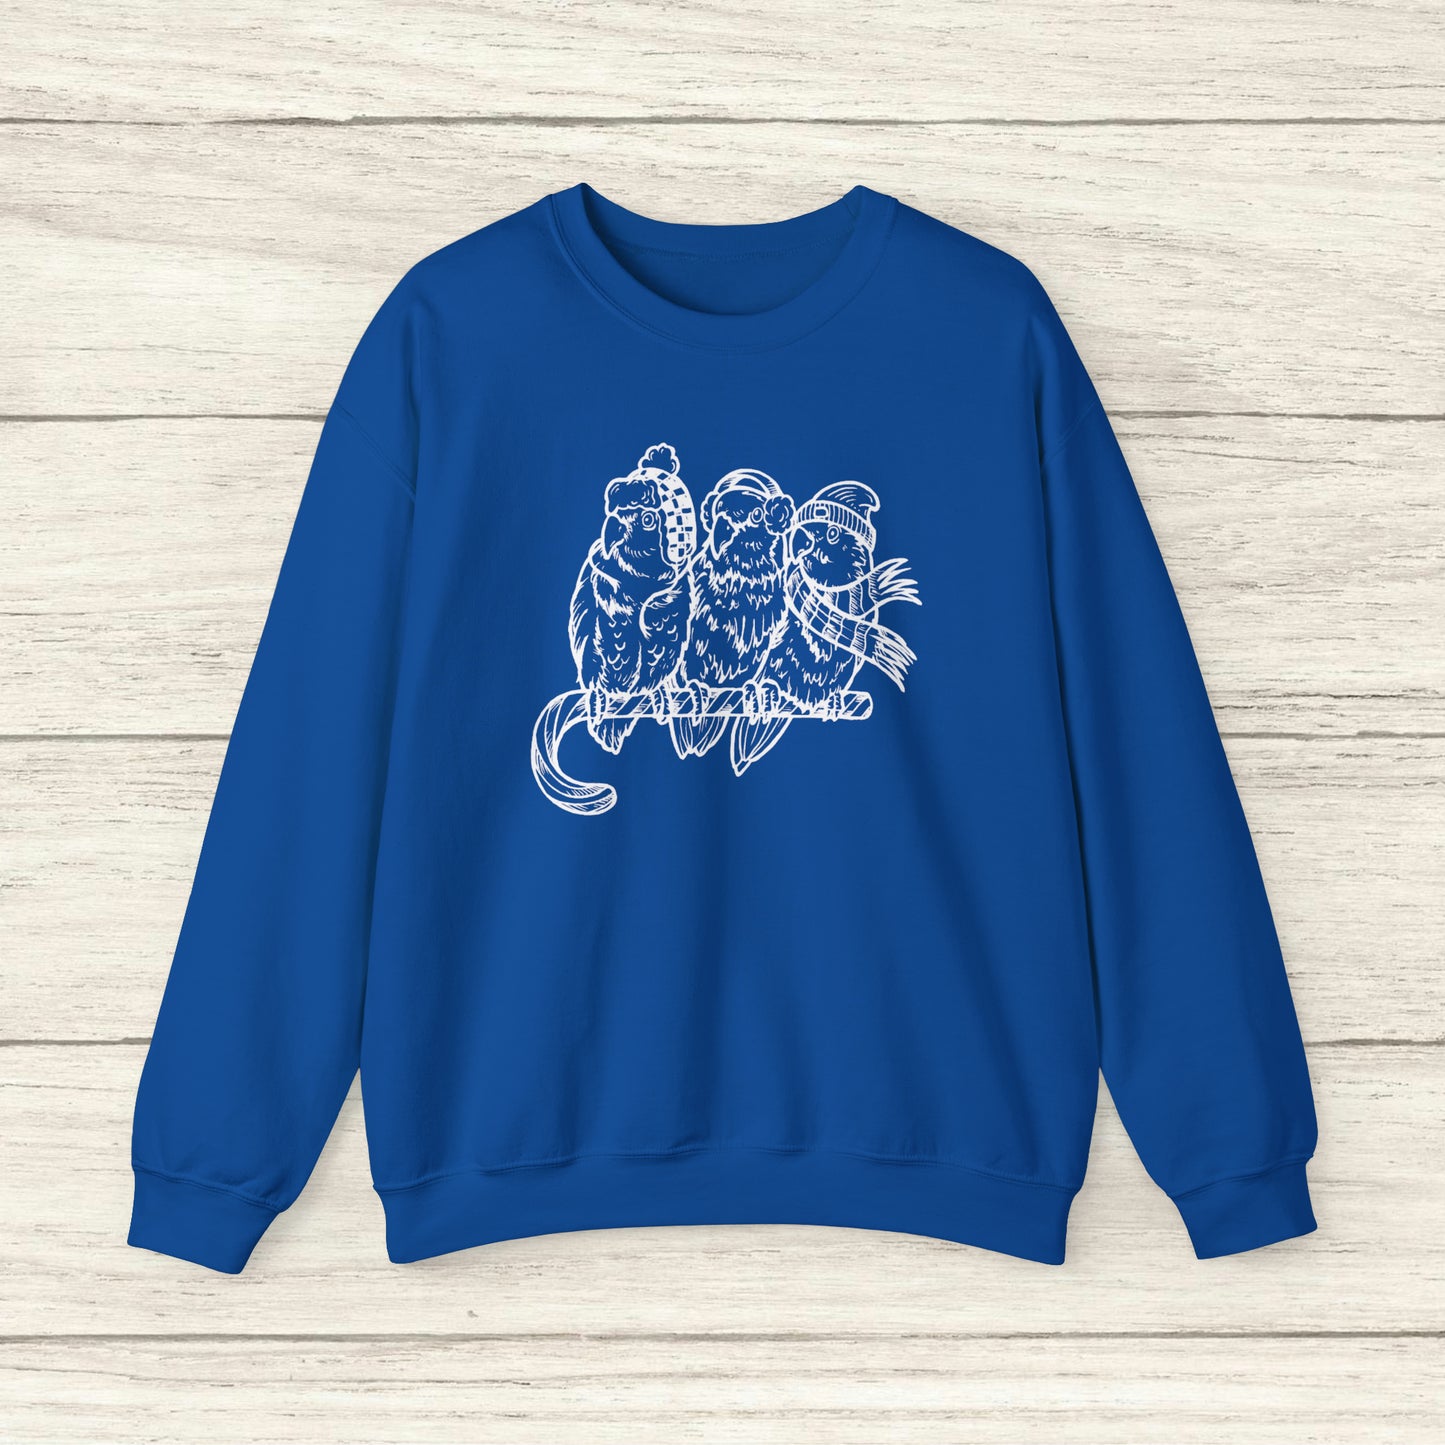 3 Lovebirds with Winter Wear & Perched on a Candy Cane, Line Art Crew Neck Sweatshirt